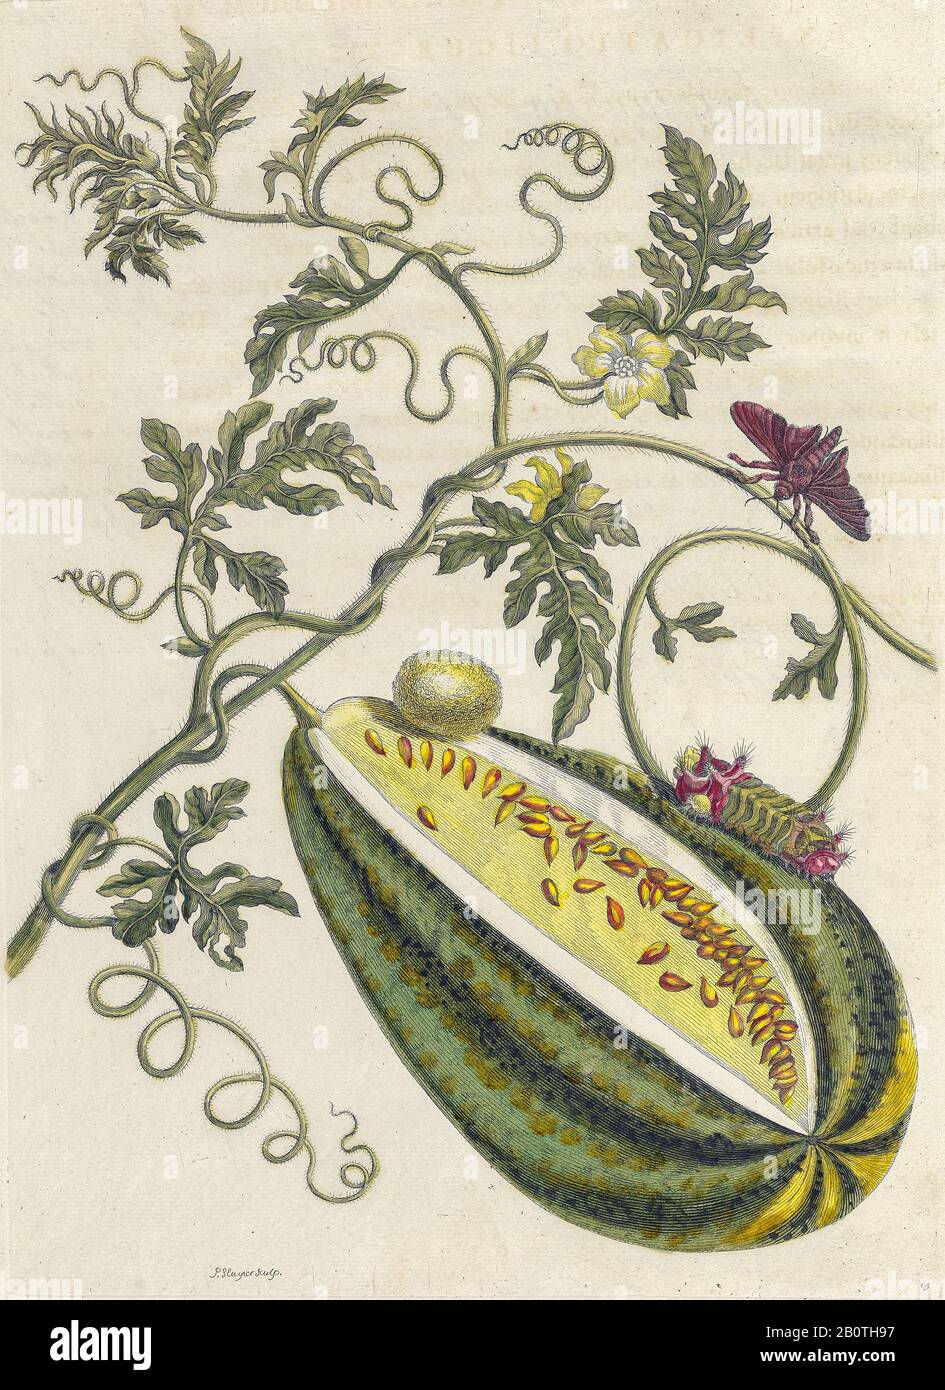 Plant and butterfly from Metamorphosis insectorum Surinamensium (Surinam insects) a hand coloured 18th century Book by Maria Sibylla Merian published in Amsterdam in 1719 Stock Photo